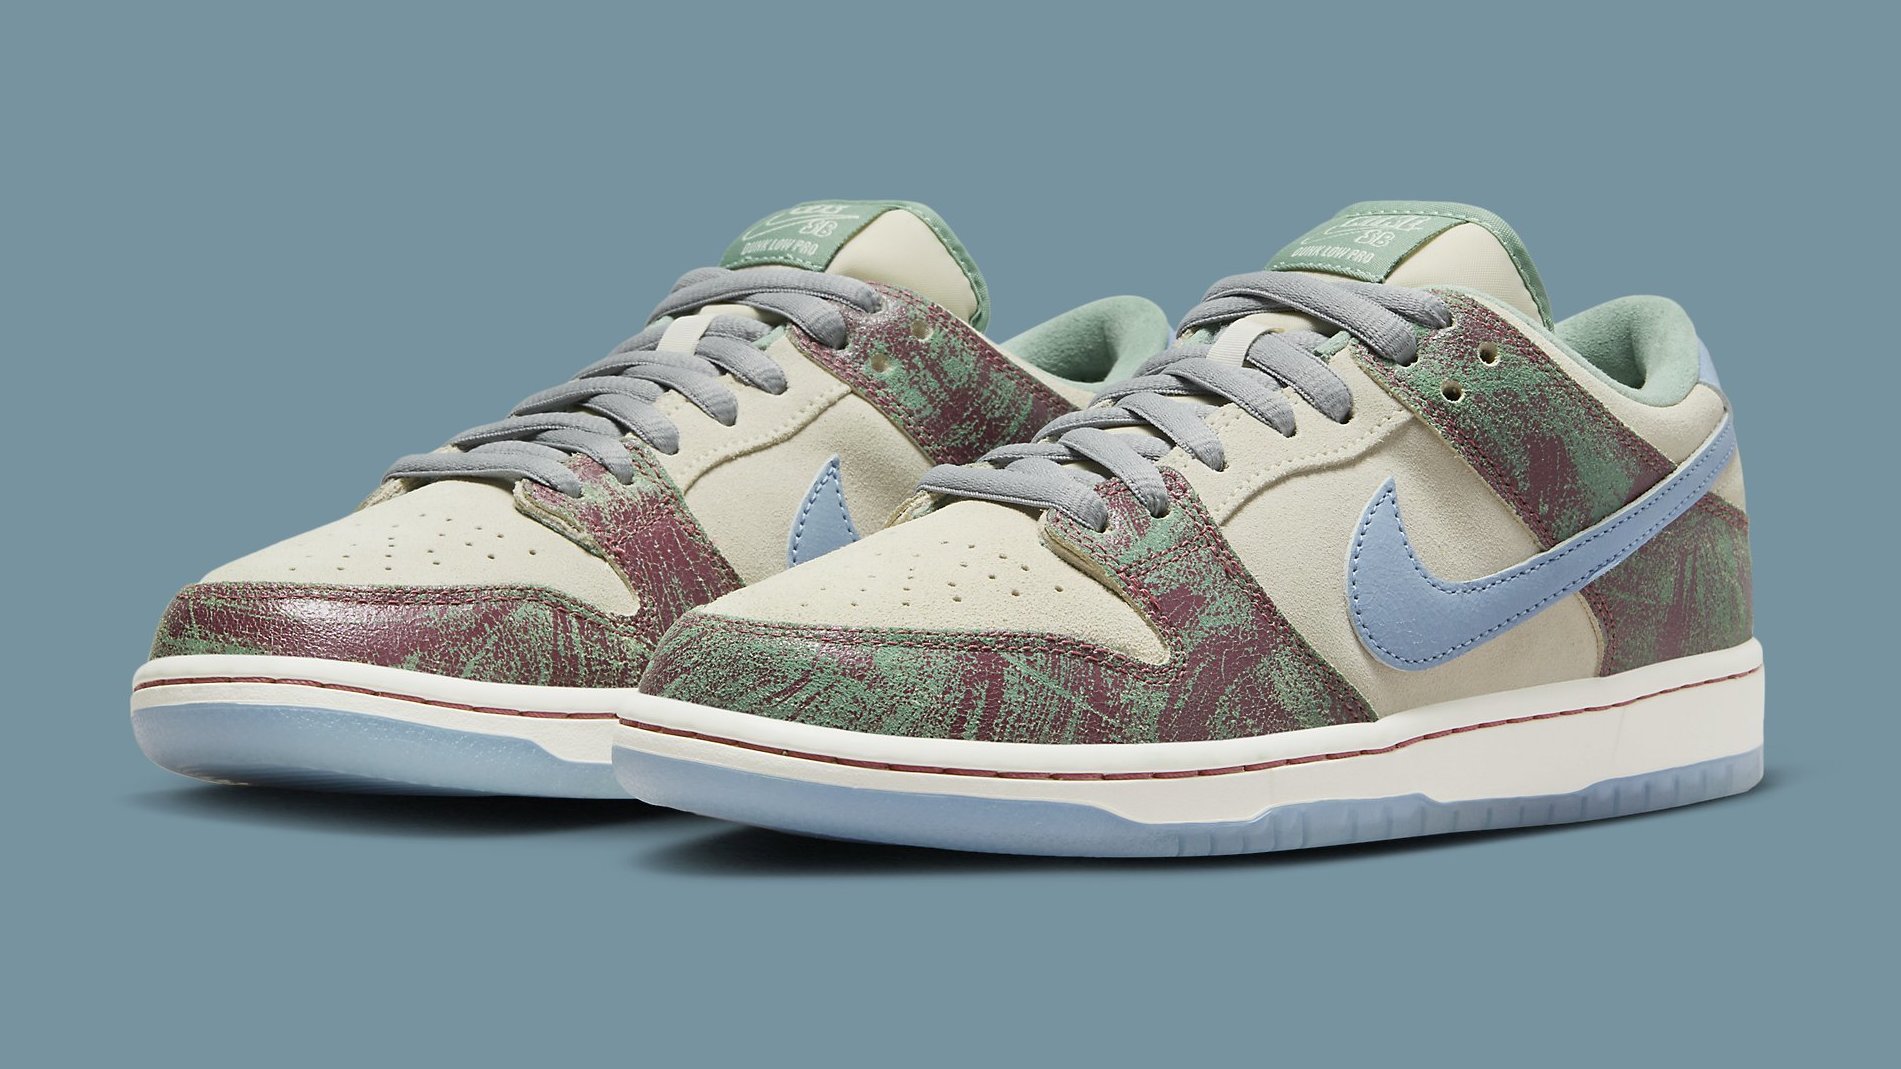 Official Look at Crenshaw Skate Club's Nike SB Dunk Collab